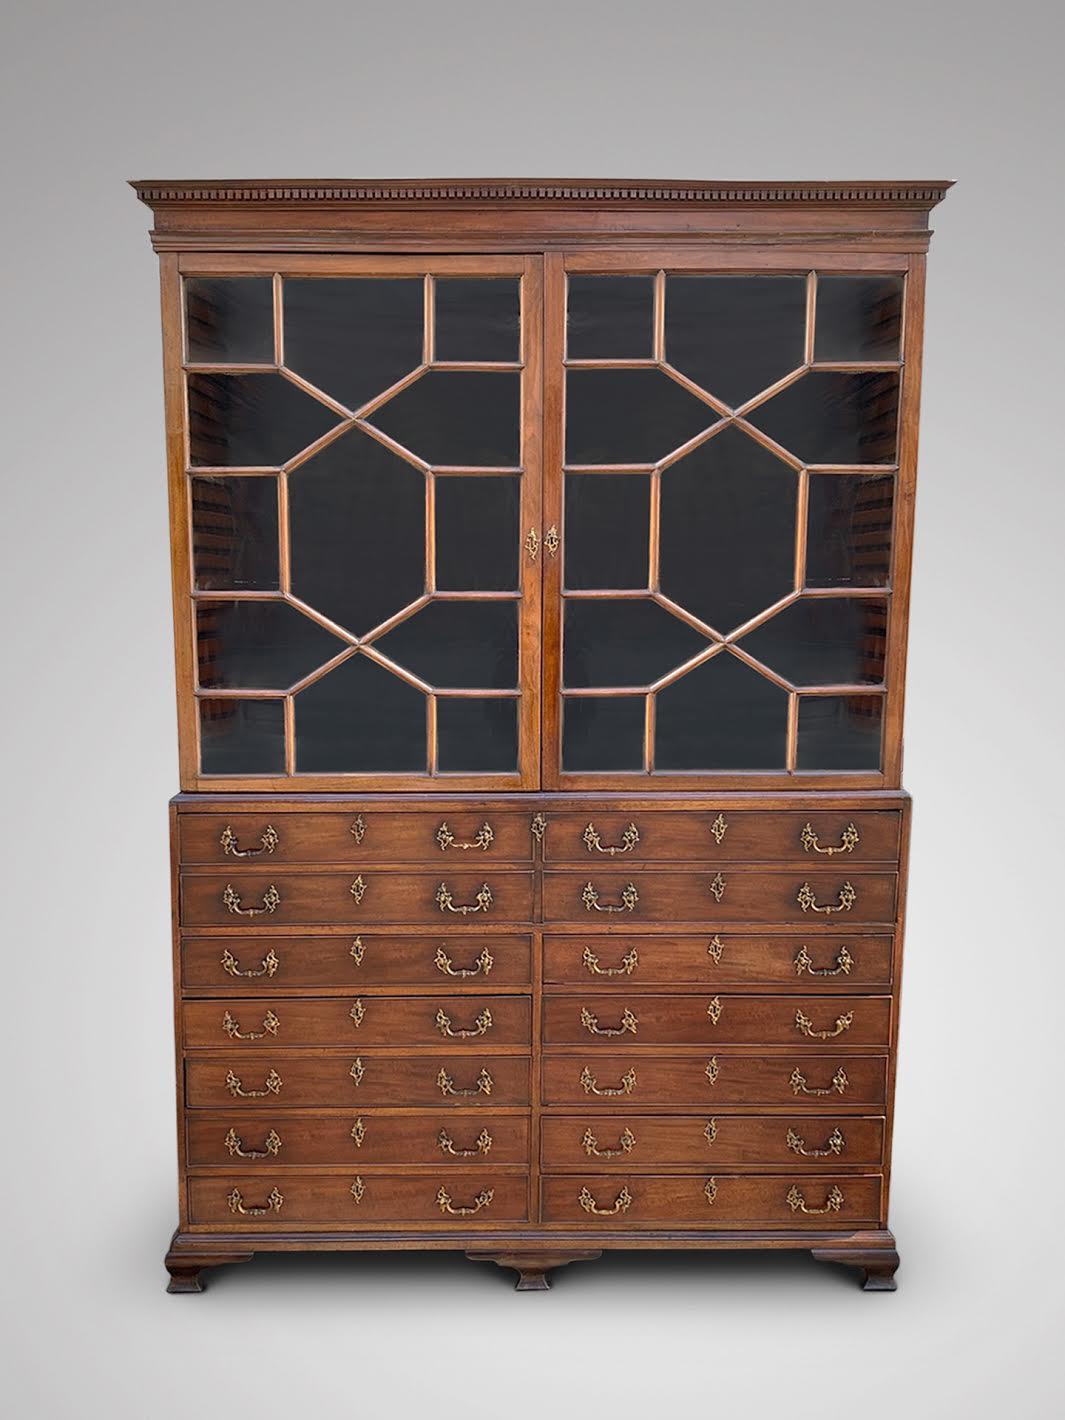 We are delighted to offer for sale this stunning 18th century, George III period mahogany secretaire bookcase . Well proportioned mahogany bookcase with glazed 2-door cabinet over a set of 14 oak lined drawers base with a fitted fall-front